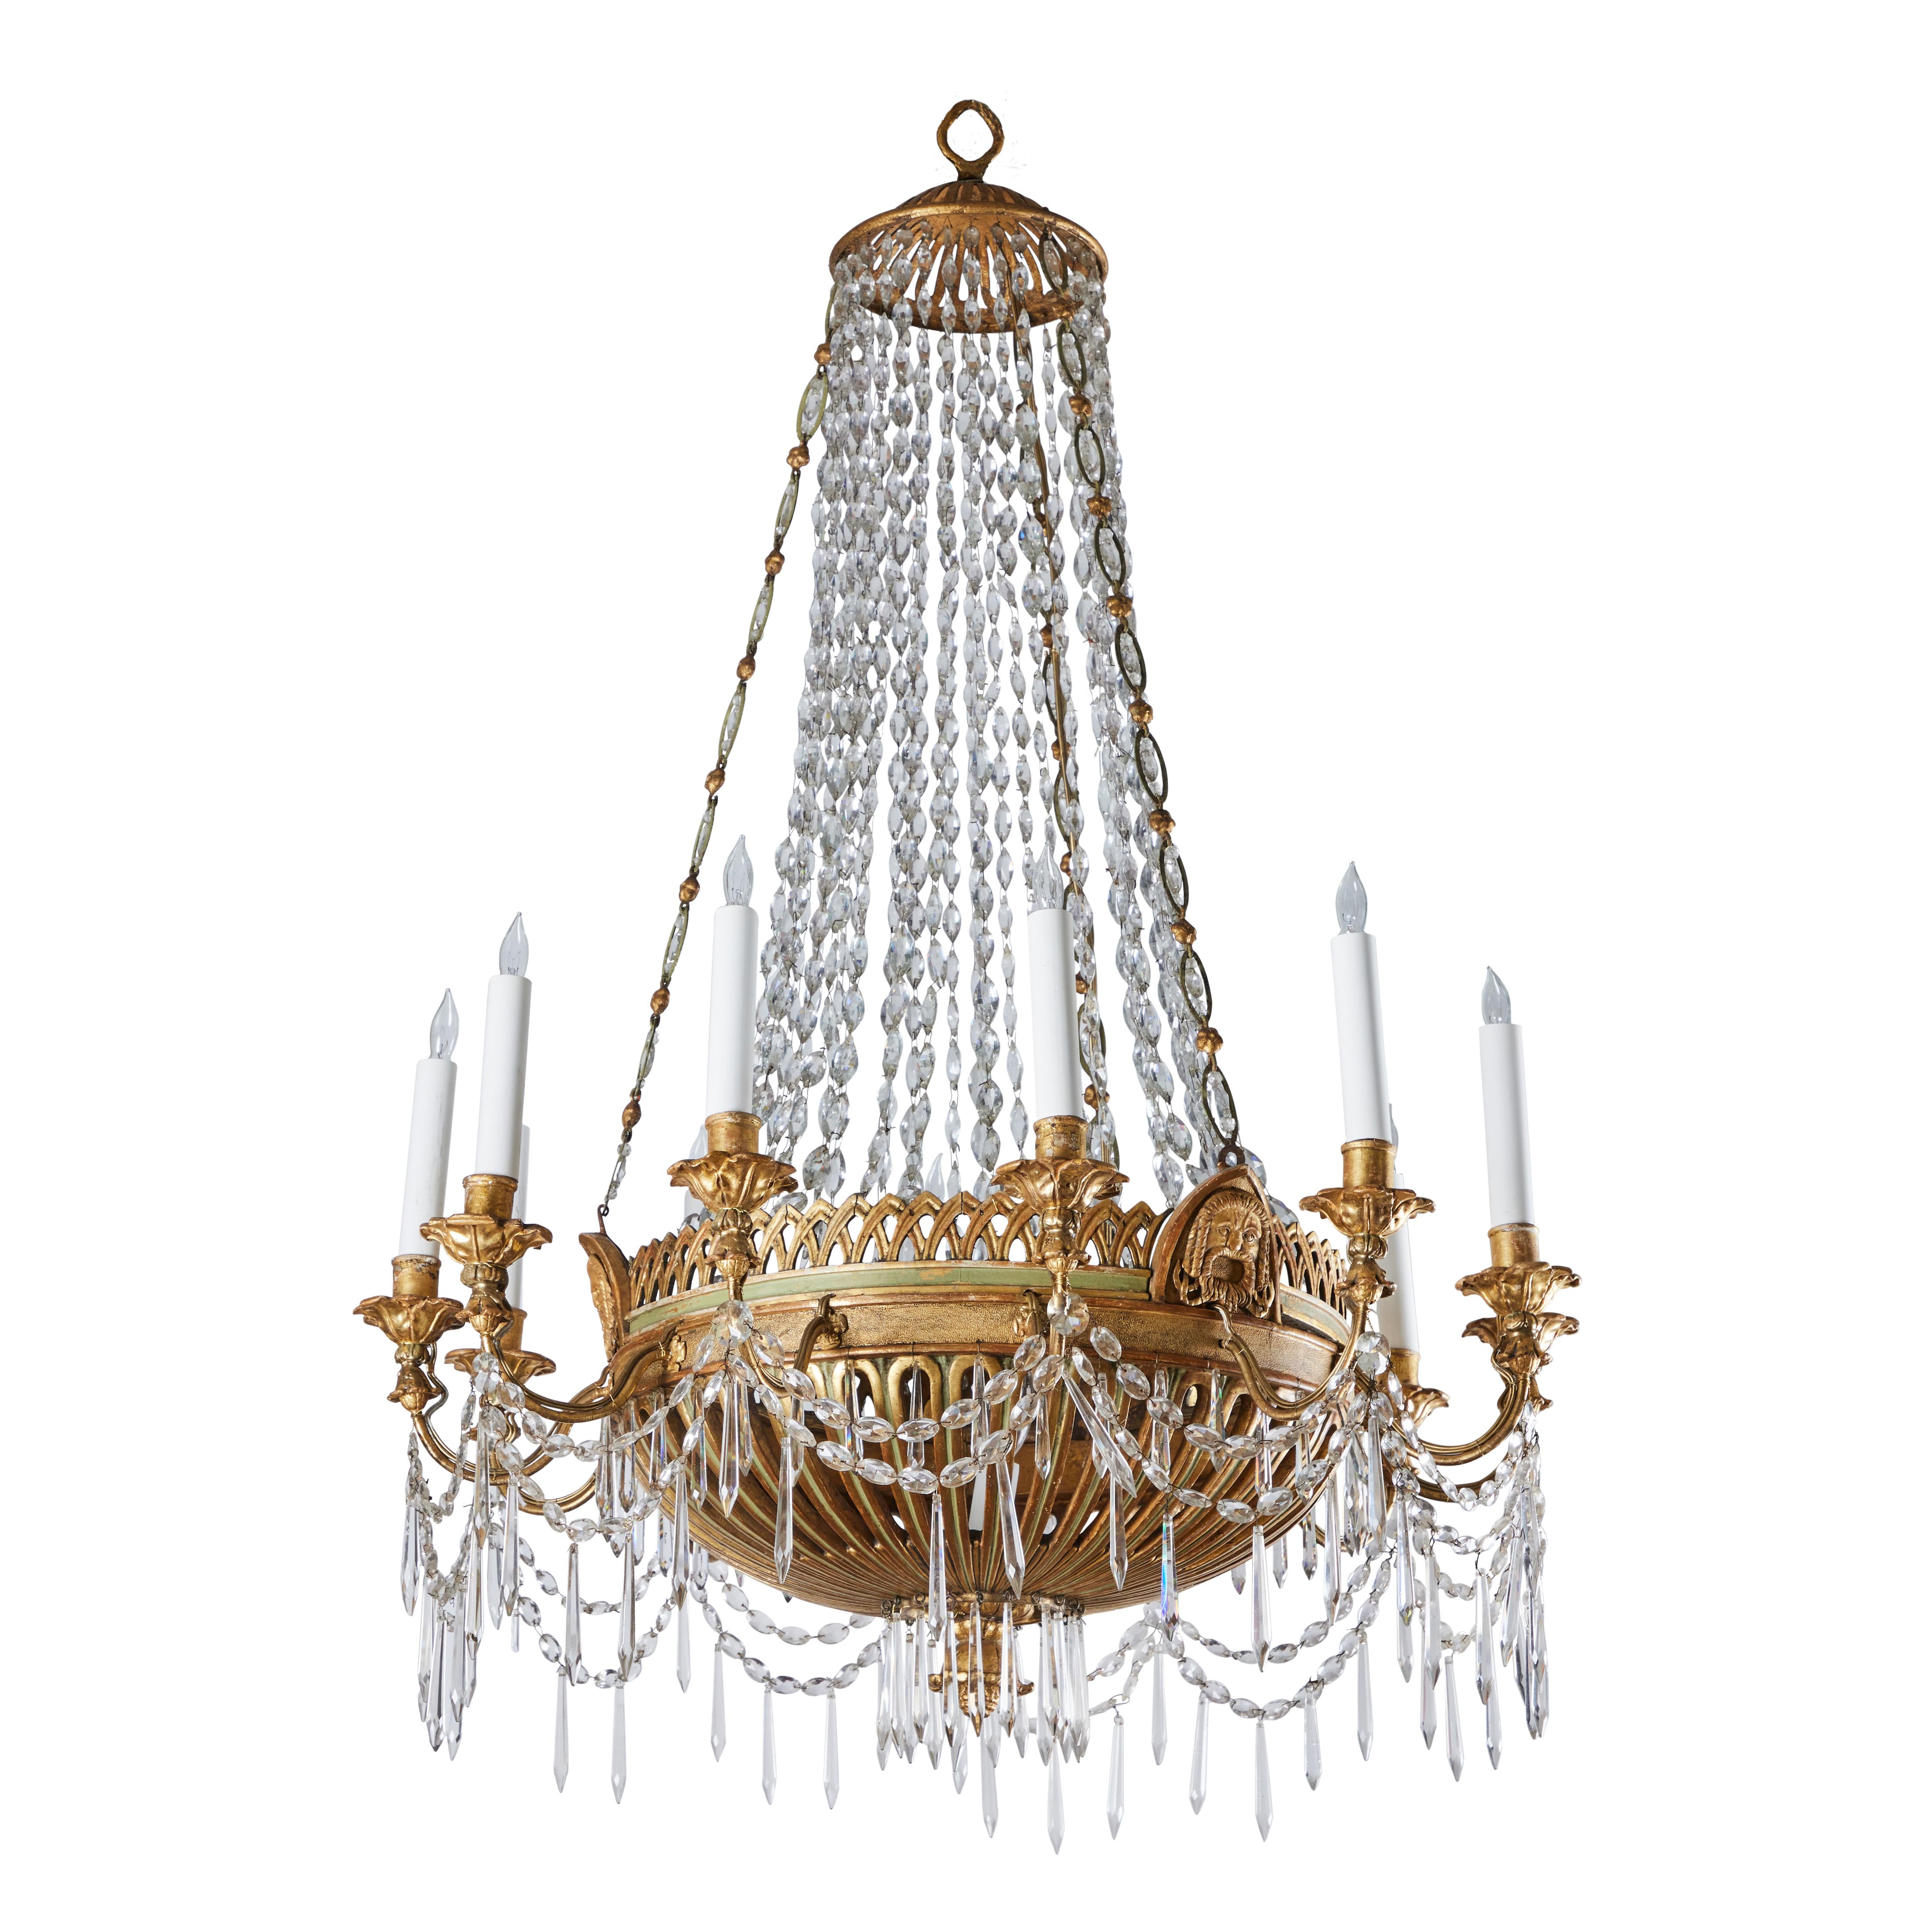 A rare, carved wood, painted, gilded and crystal chandelier.  12 candles and 1 center light. Chain of metal rings and gilt-wood spheres, gilt-wood cap. From the area of Genoa, Italy.  